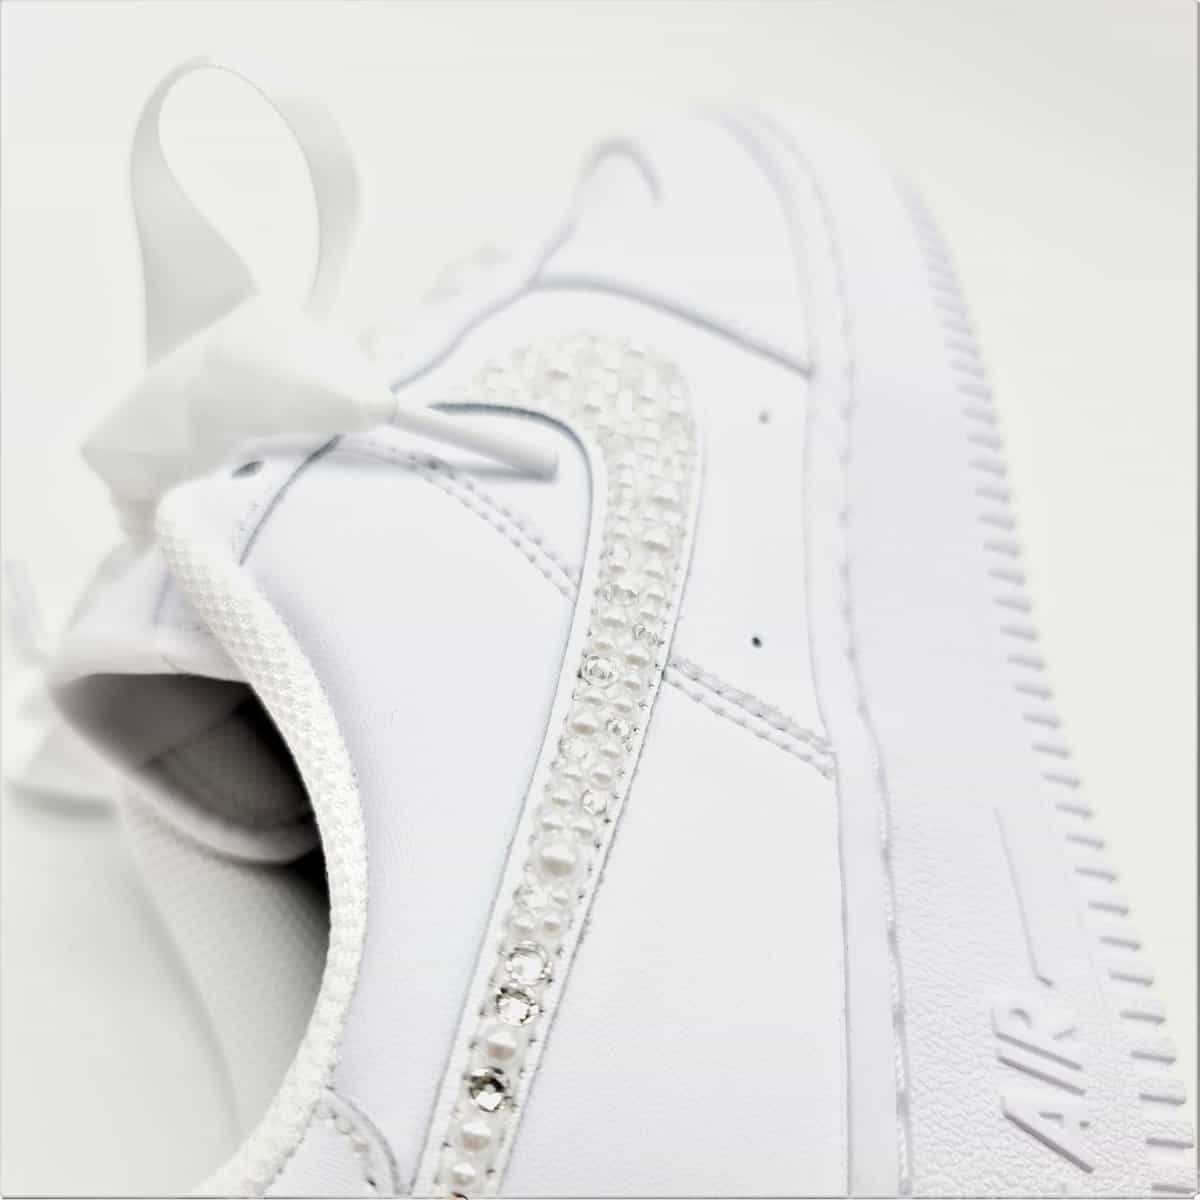 Buy Pink Air Force 1 Air Force 1s Custom Pink Air Forces Custom Online in  India 